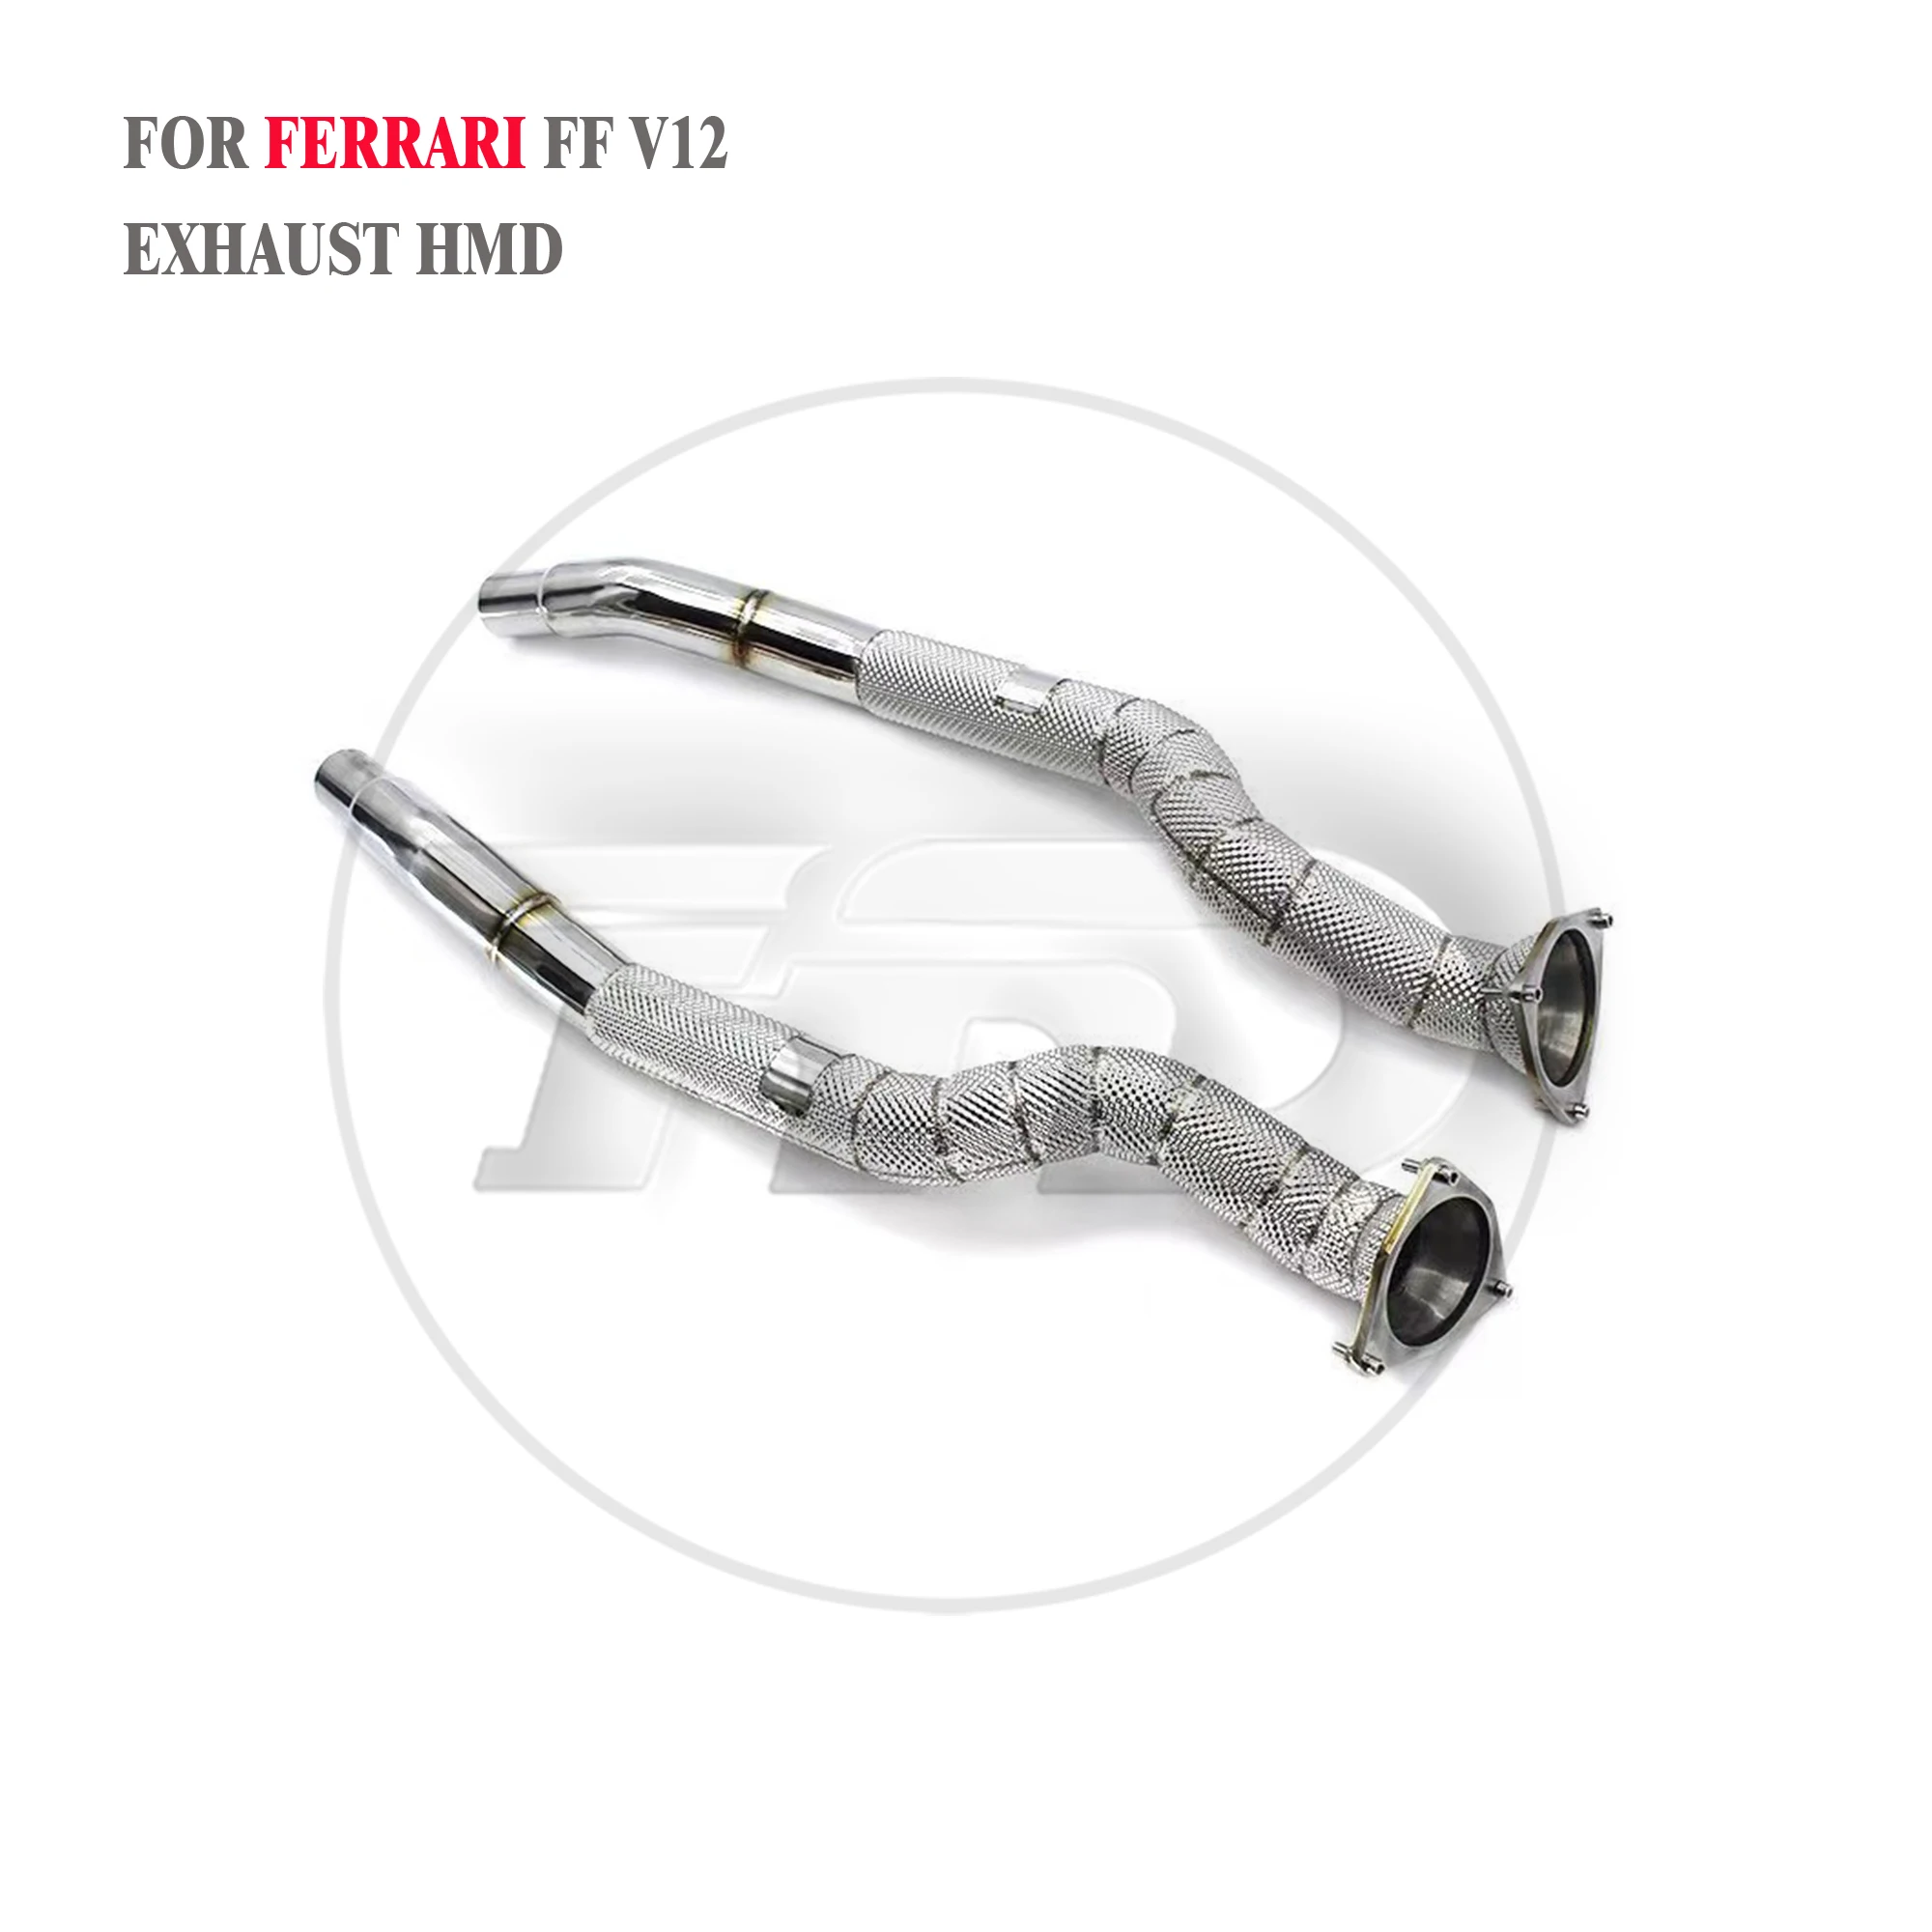 

HMD Exhaust System High Flow Performance Downpipe for Ferrari FF V12 6.3L Catted Catless Pipe With Heat Shield